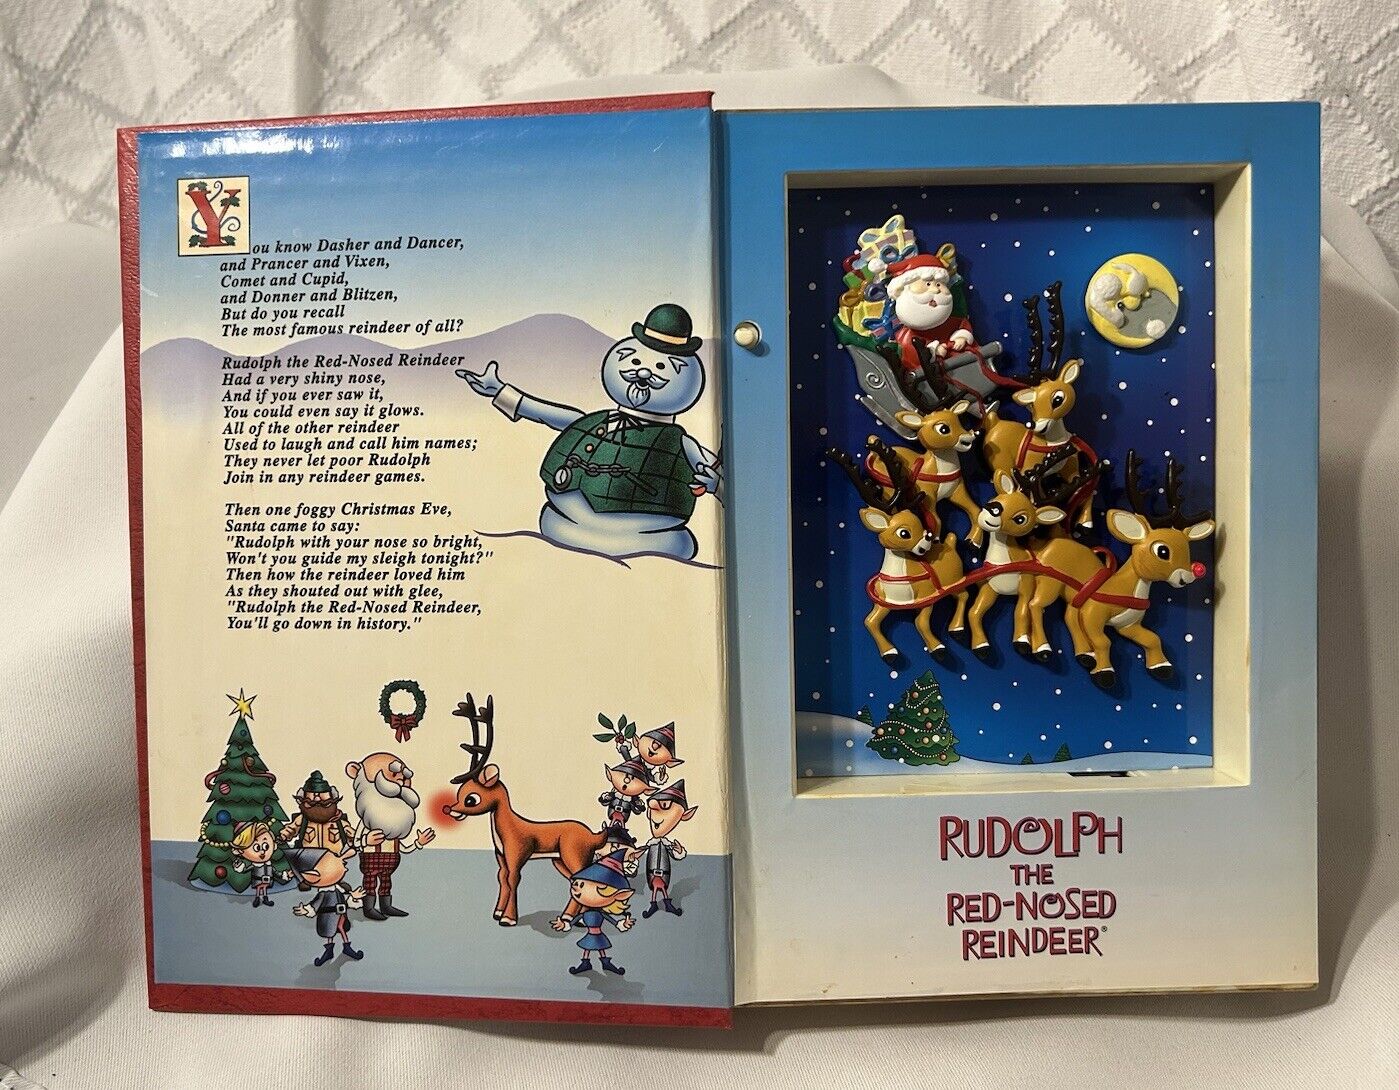 RUDOLPH the Red-Nosed Reindeer Animated Musical Book—Music Box—Mr.Christmas 2001